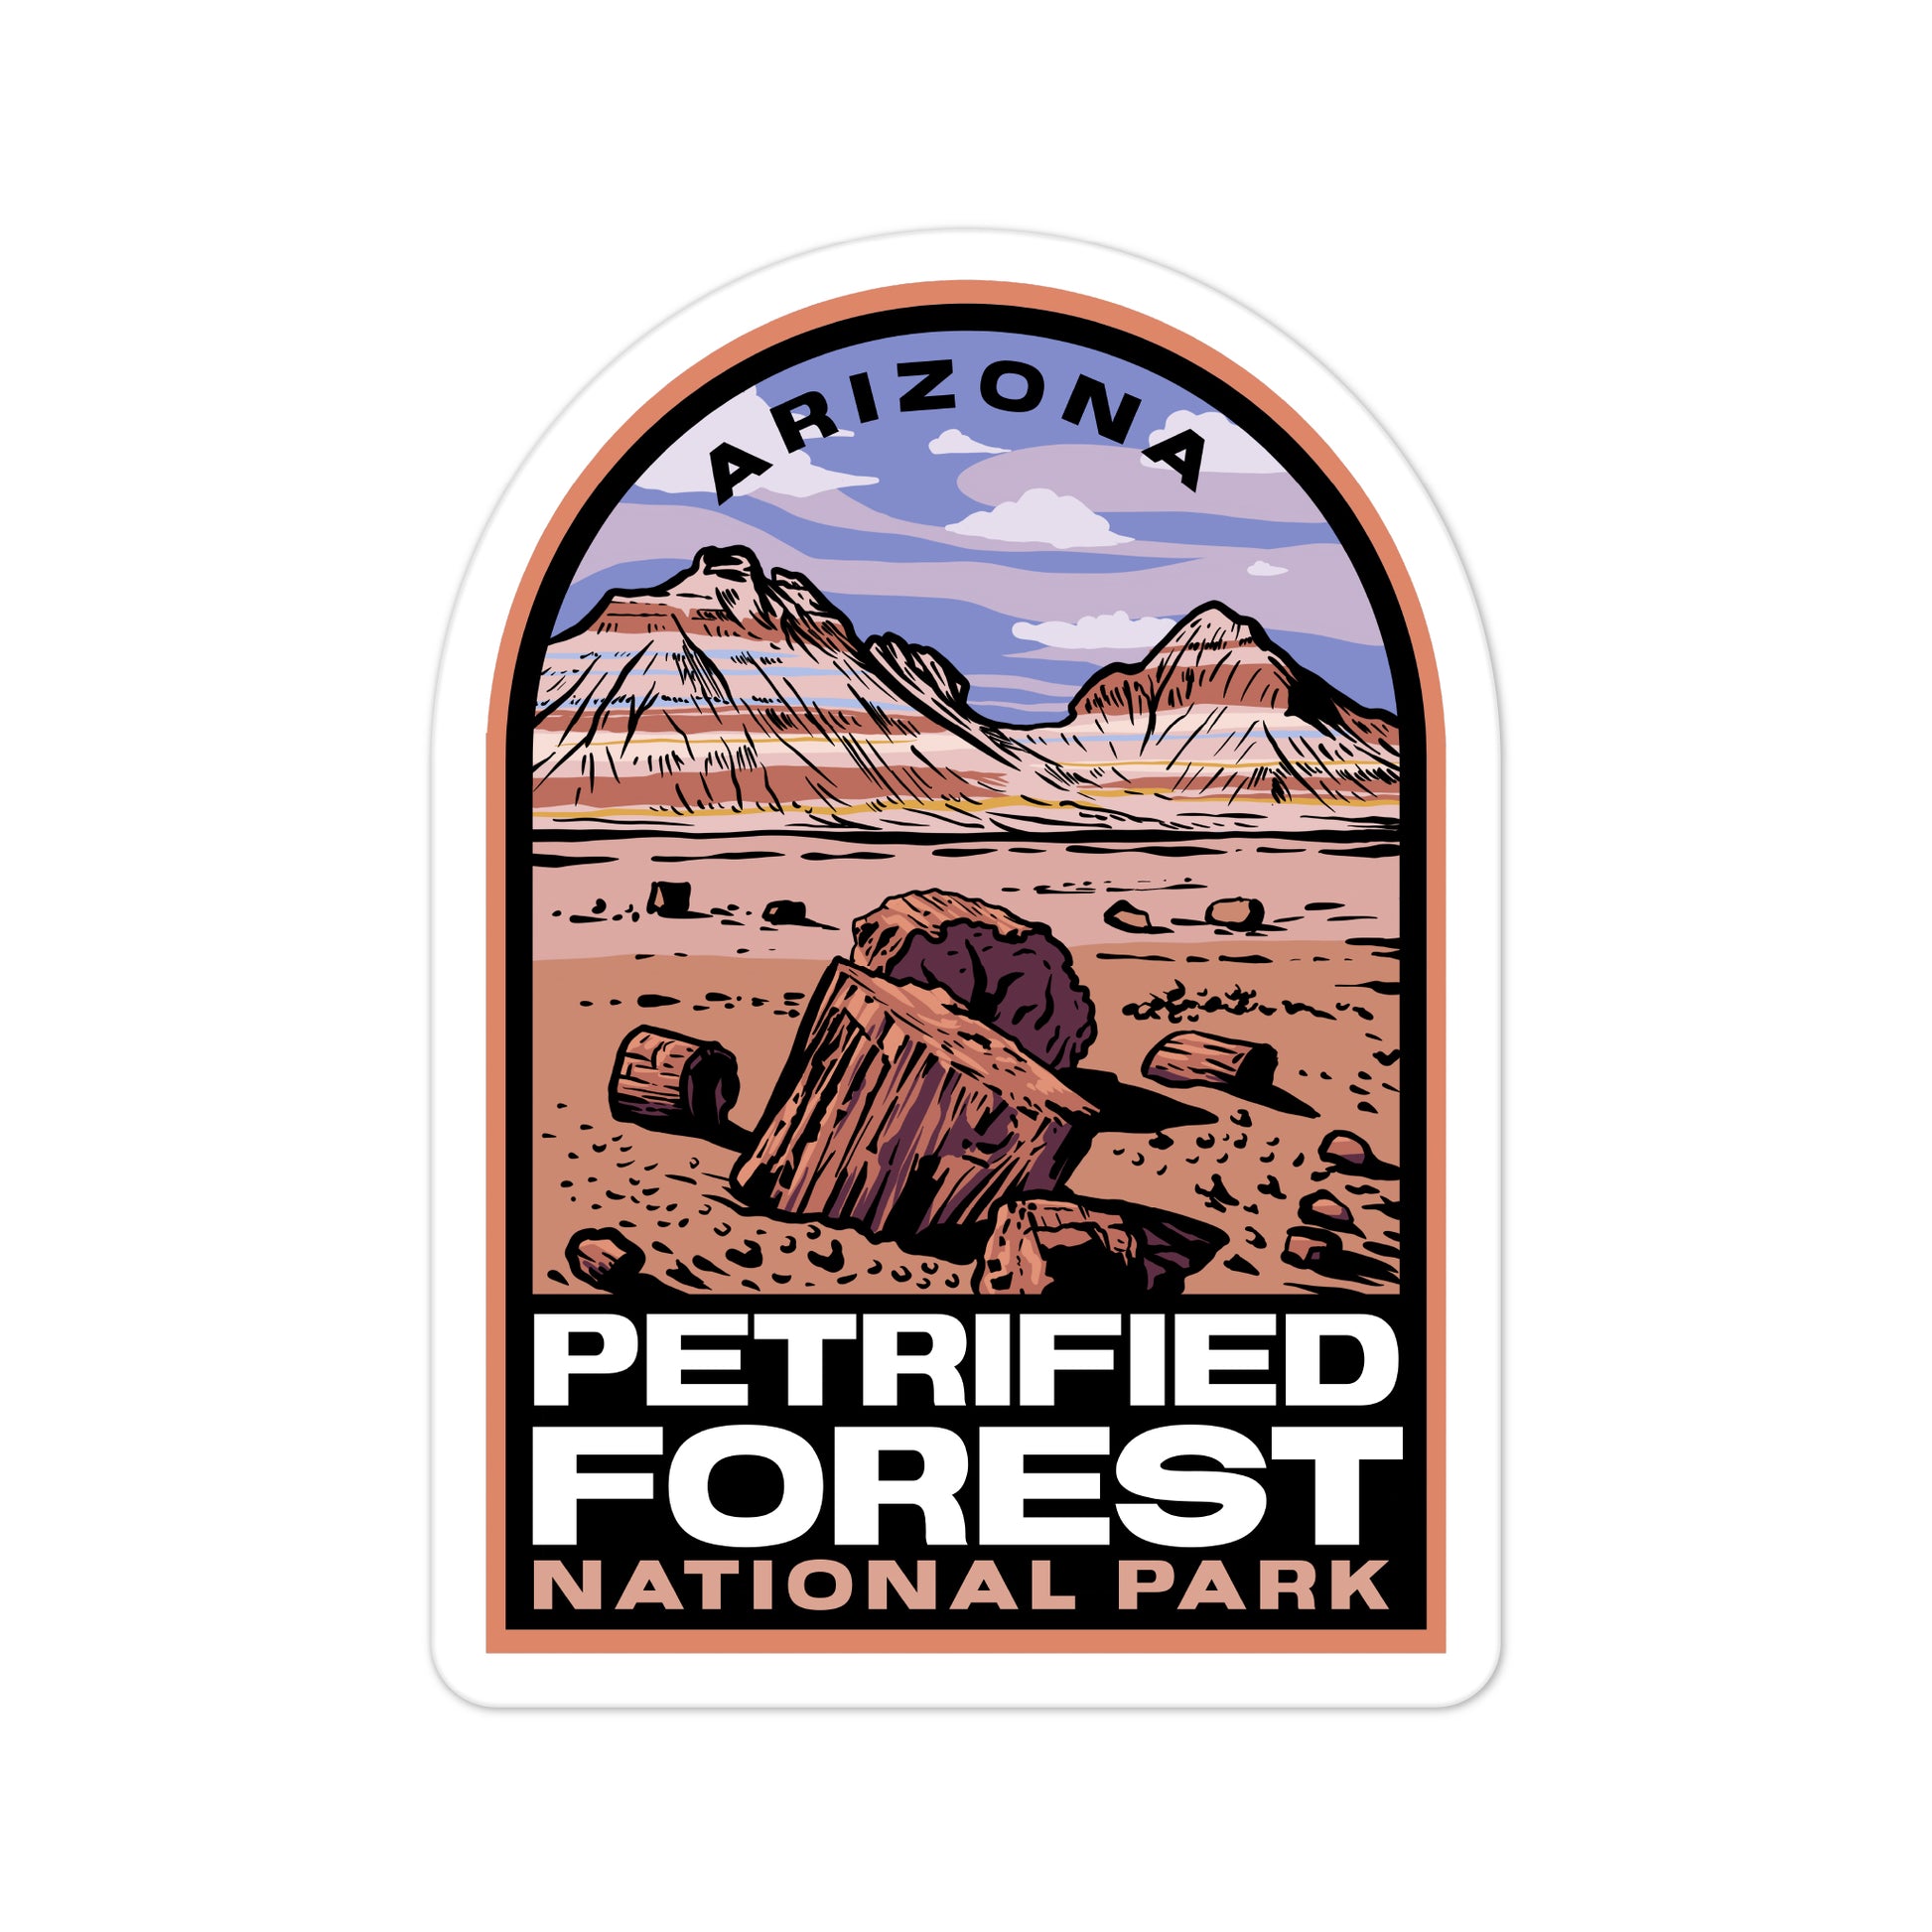 A sticker of Petrified Forest National Park